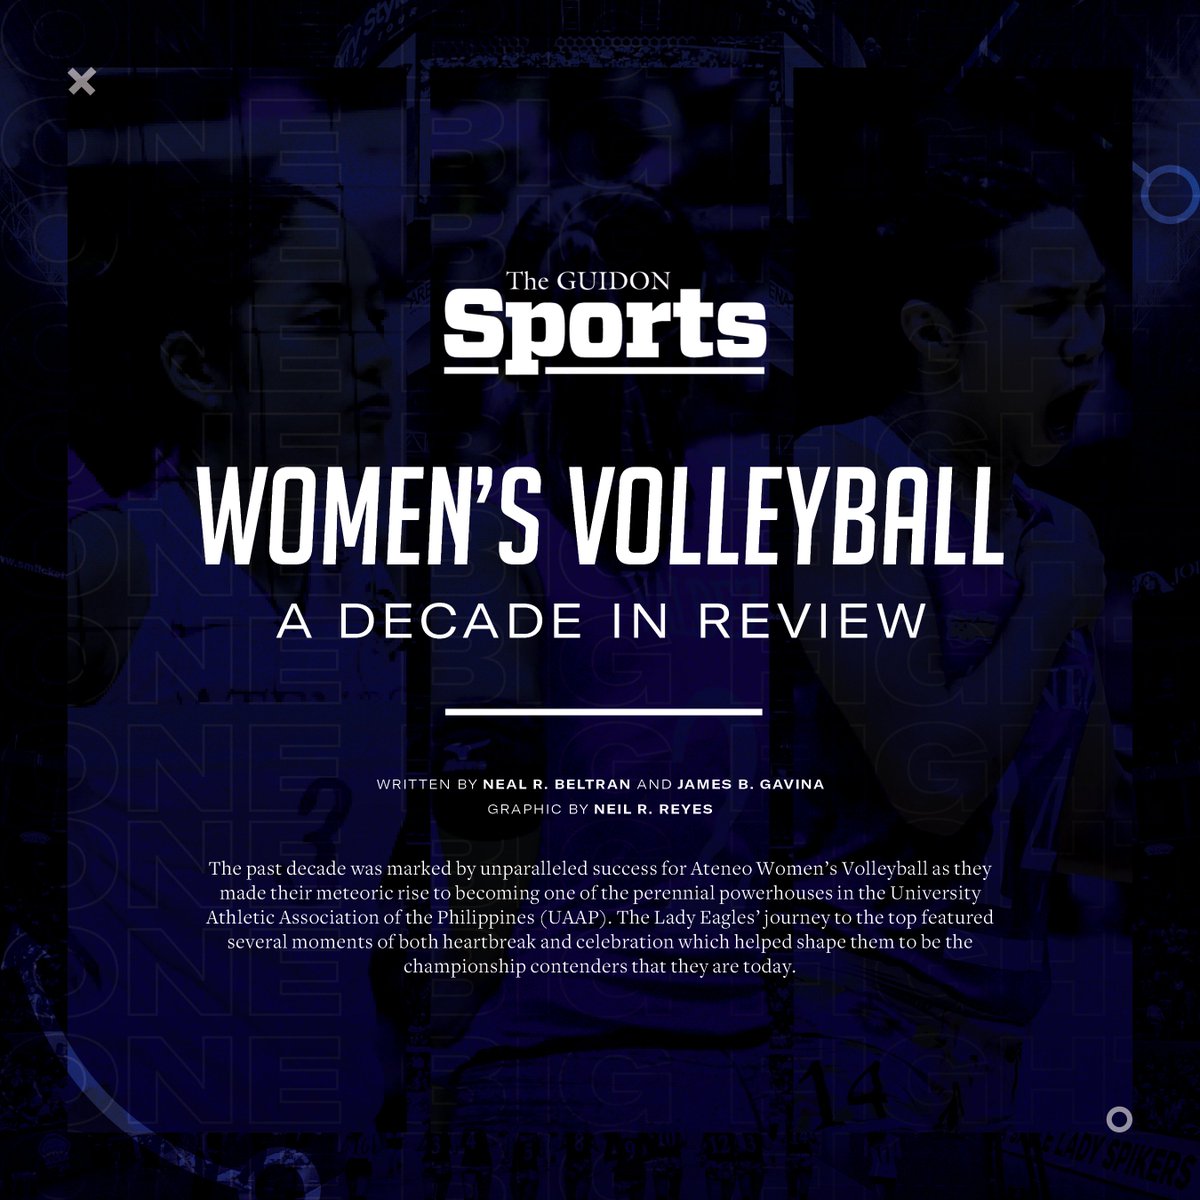 The GUIDON Sports takes a trip down memory lane as we revisit the last decade of Ateneo Women's Volleyball history that featured three championships and seven finals appearances. Browse the full album here: tgdn.co/2RgJA7s